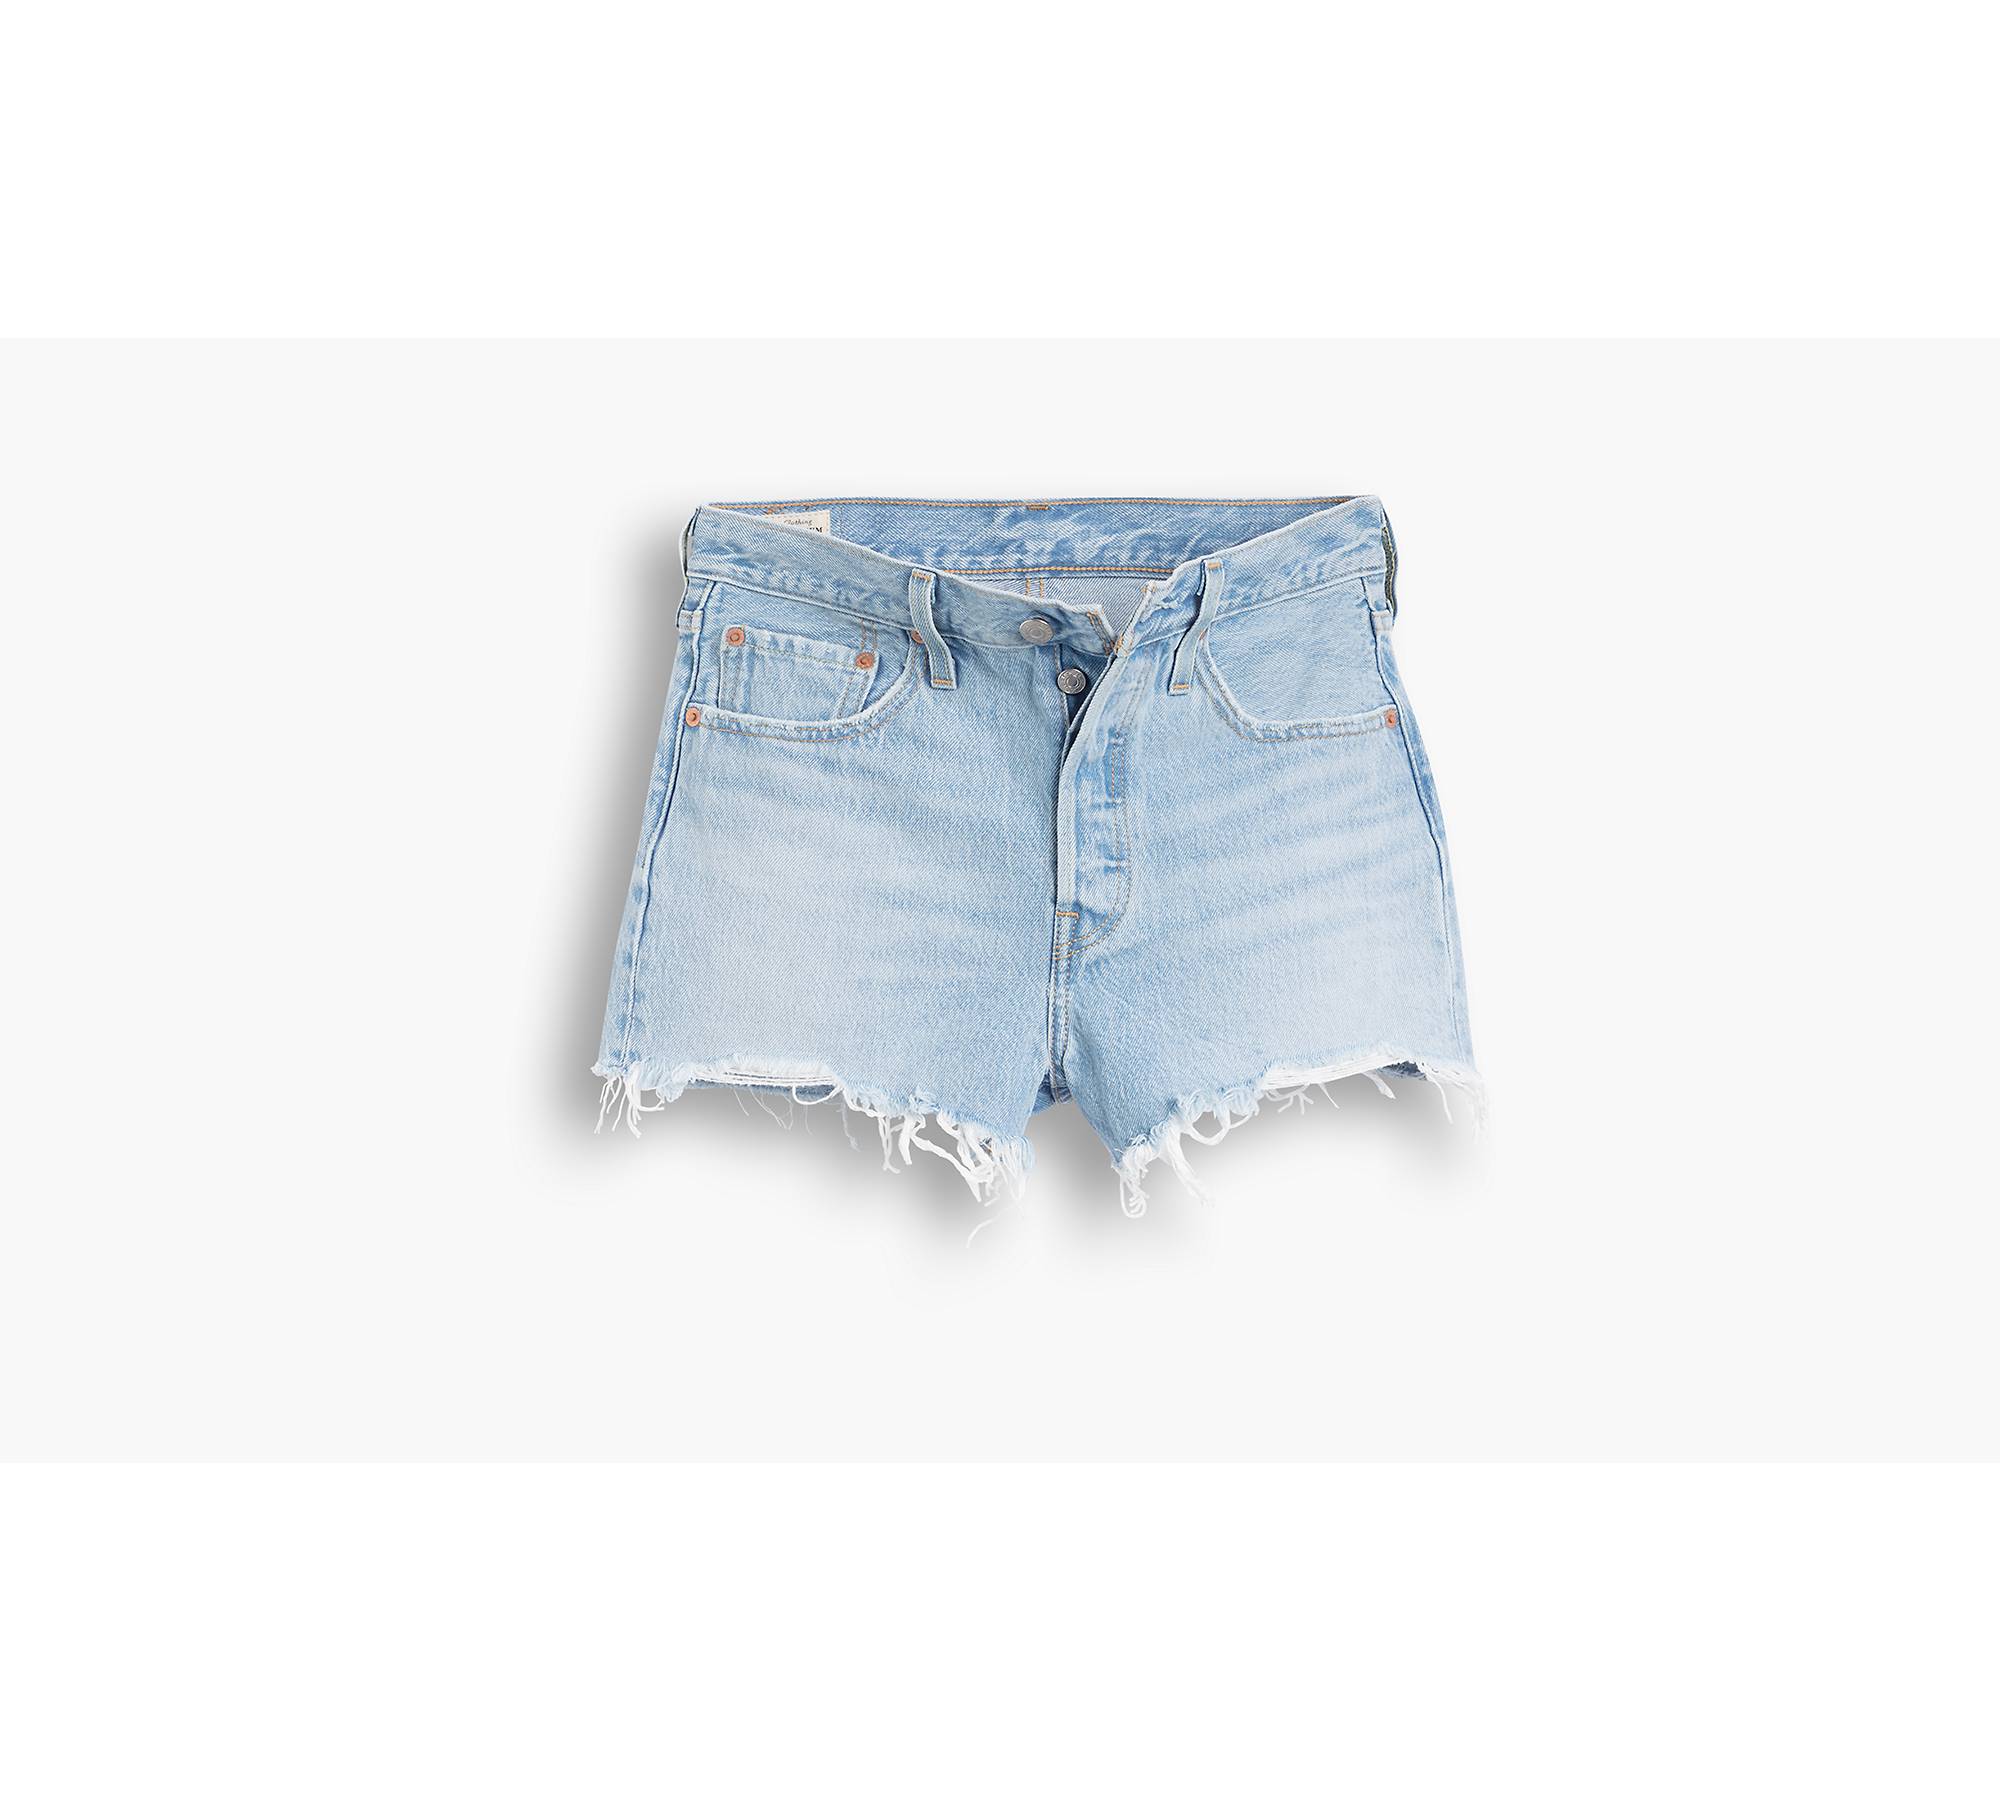 Jeans Shorts – One Leg Up Brand